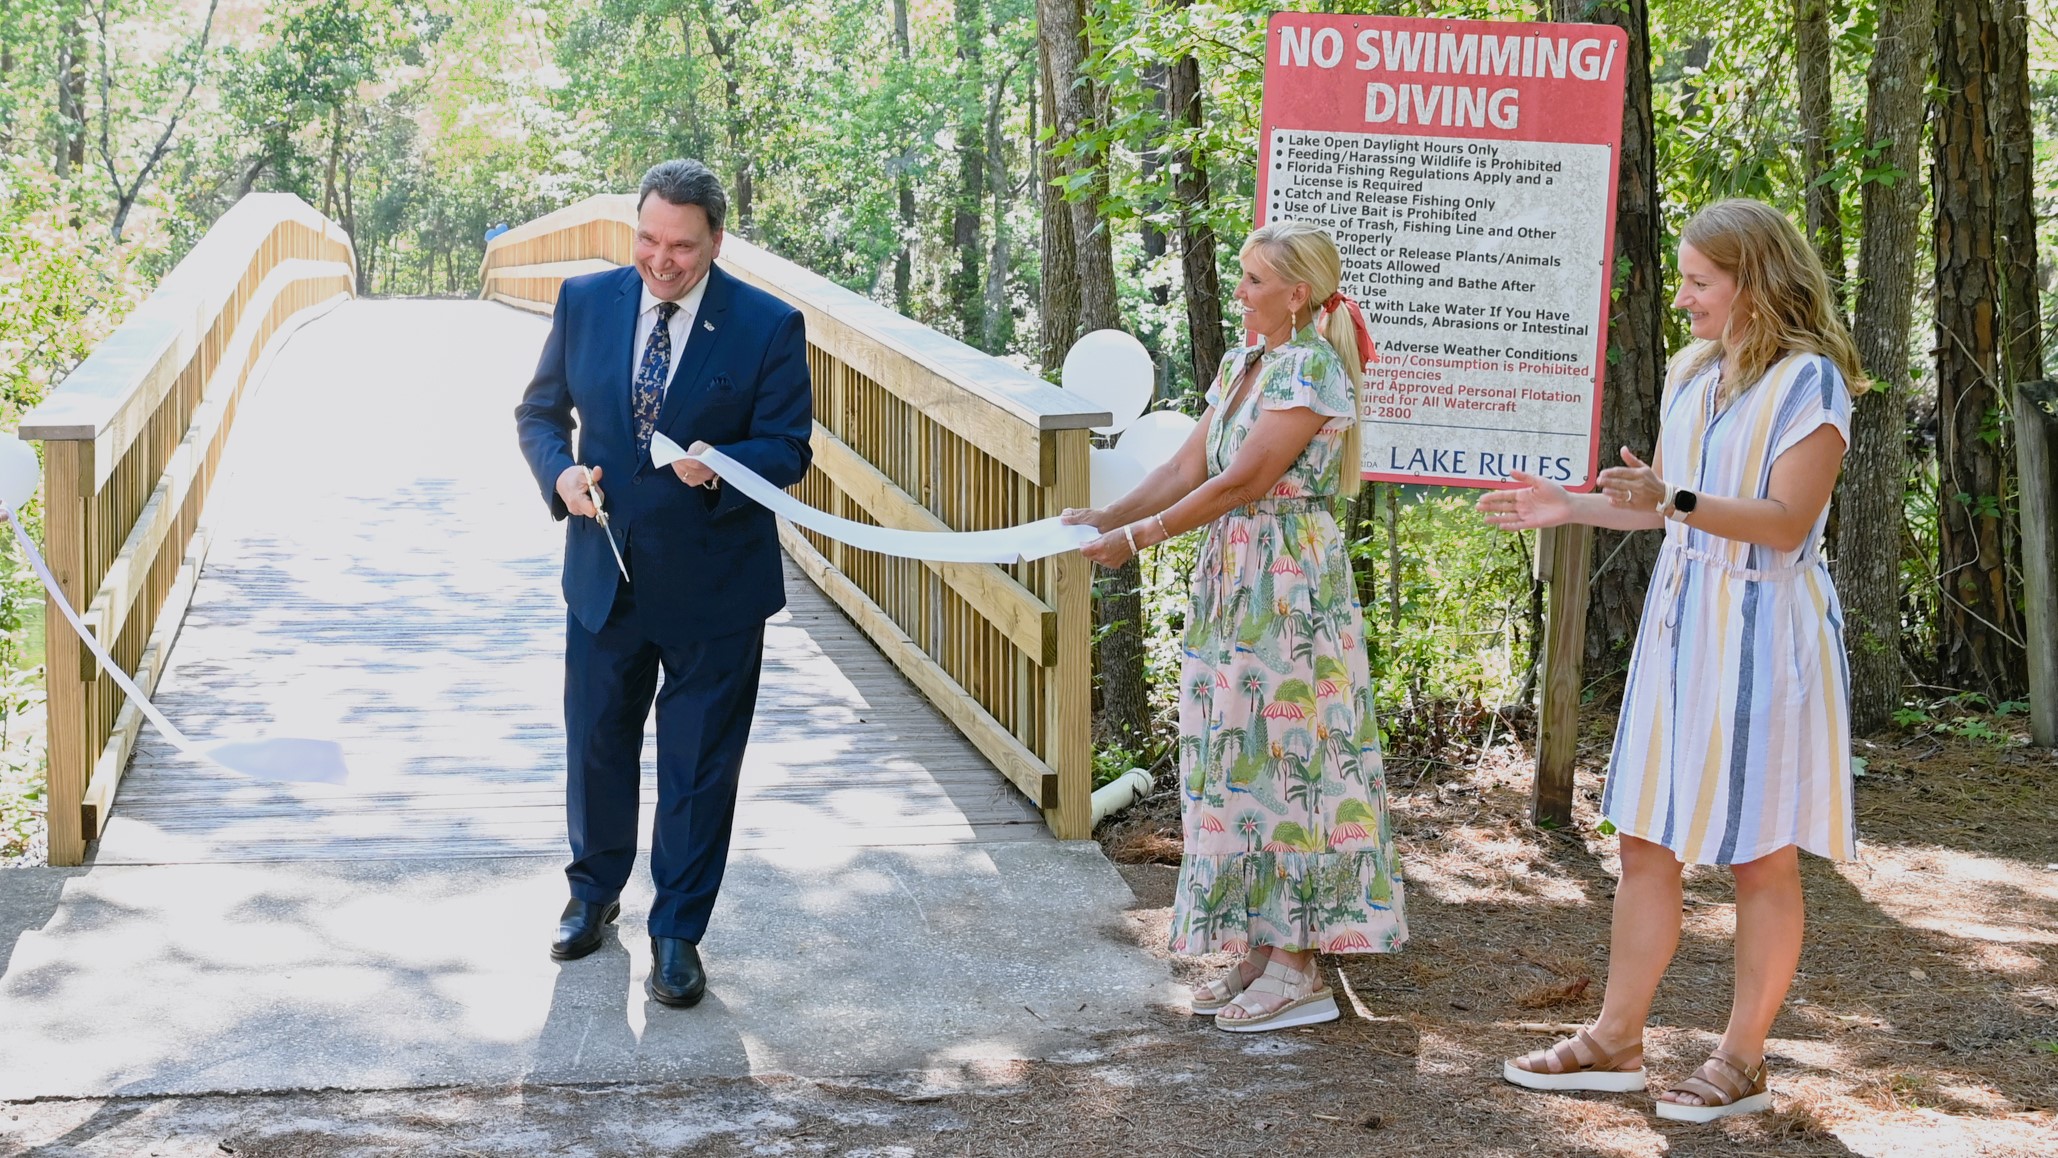 Featured image for “UNF reopens nature trails after $1 million renovation”